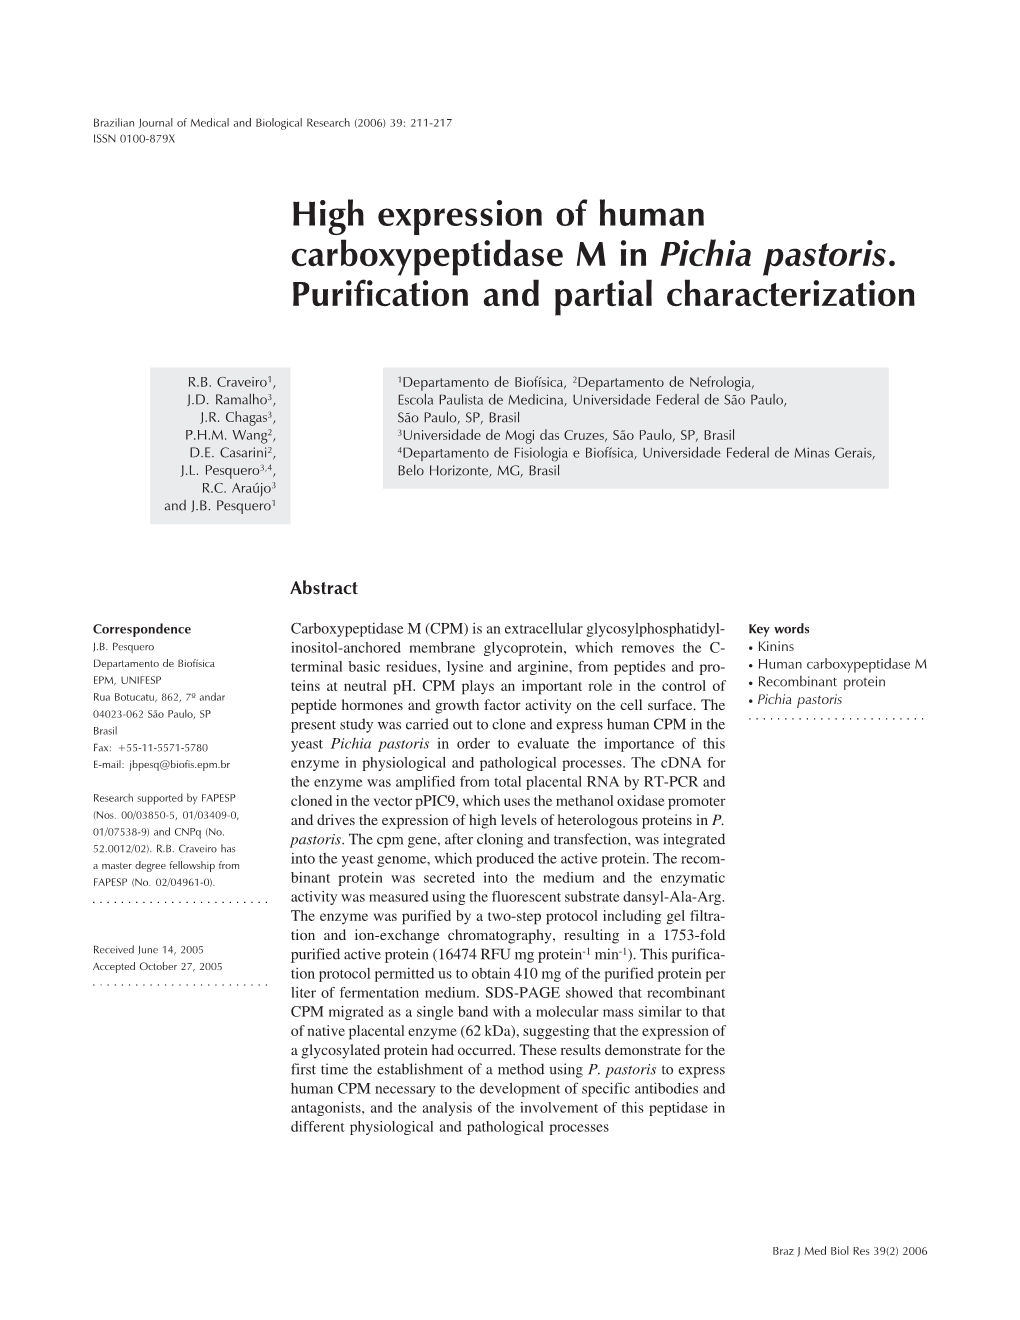 High Expression of Human Carboxypeptidase M in Pichia Pastoris